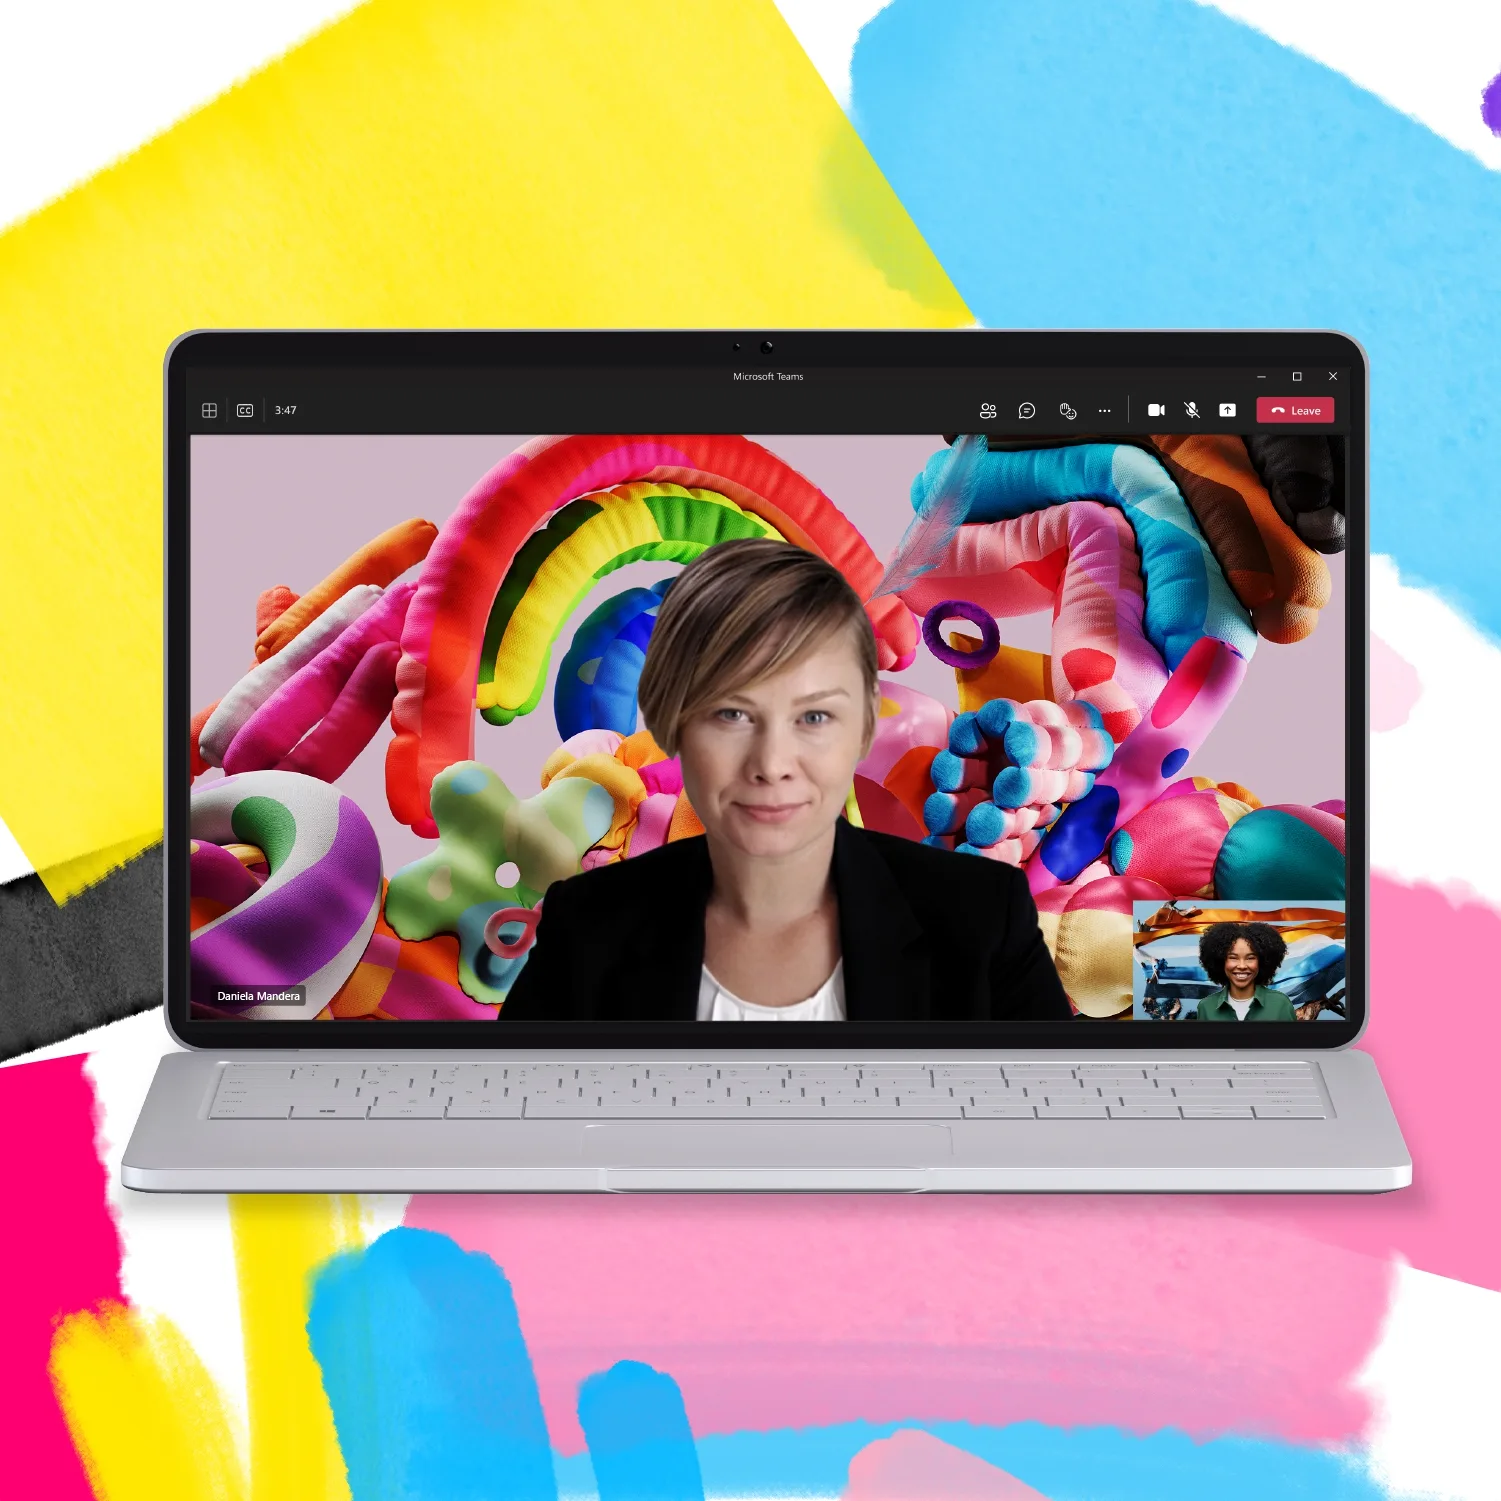 A laptop with a woman's face on a colorful background.